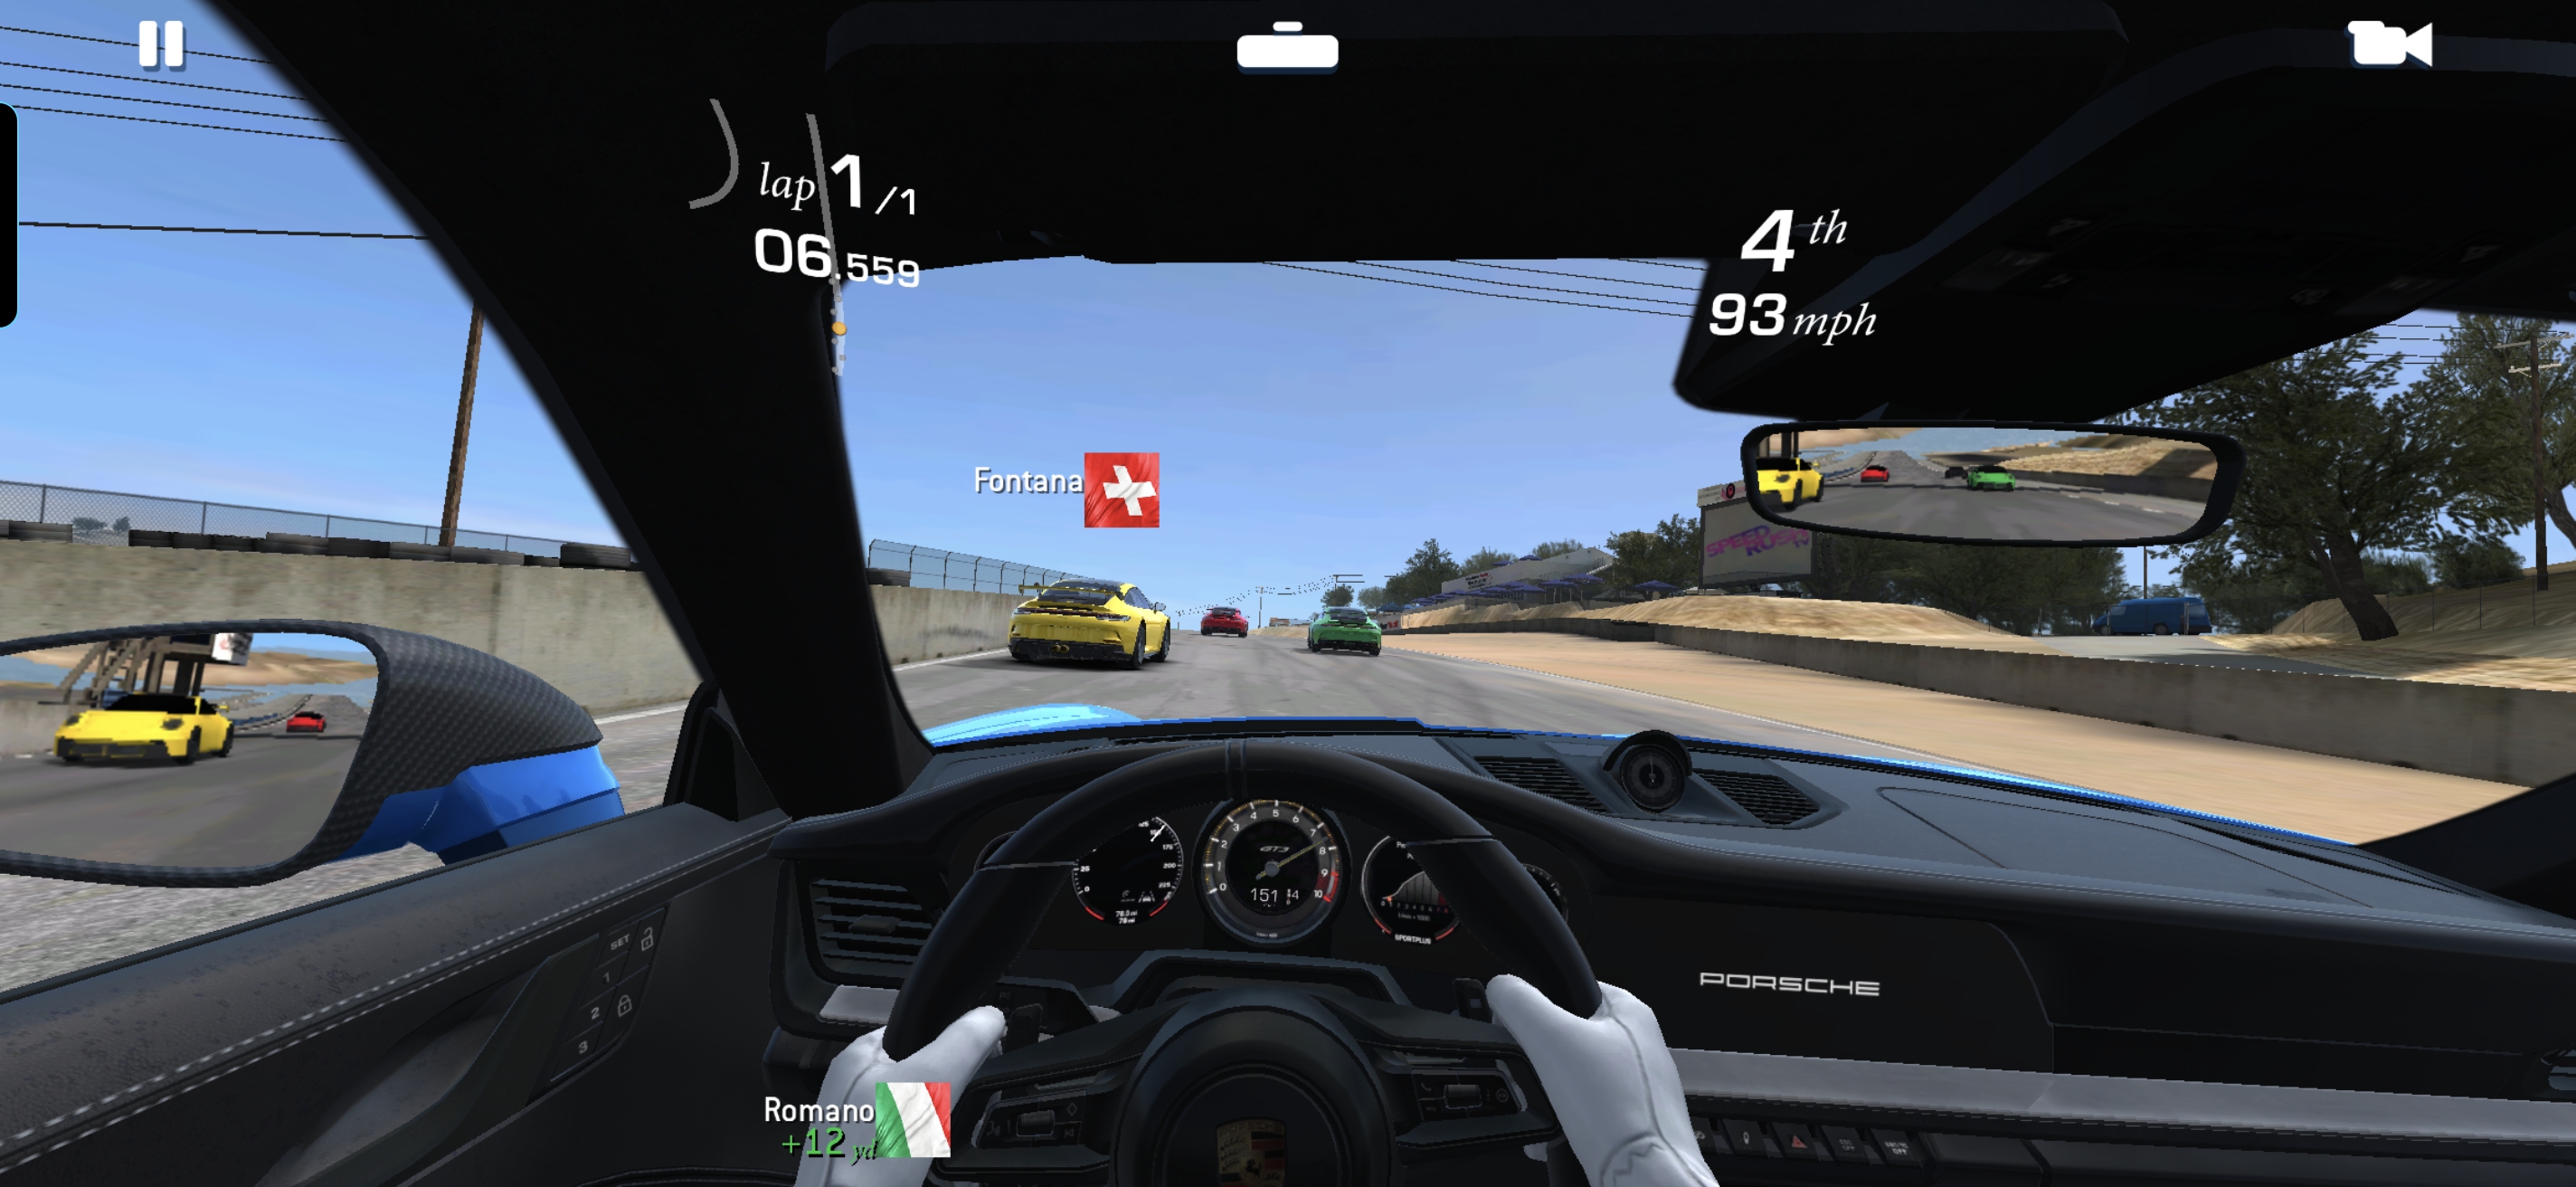 Real Racing 3 gameplay on the Honor Magic 5 Pro